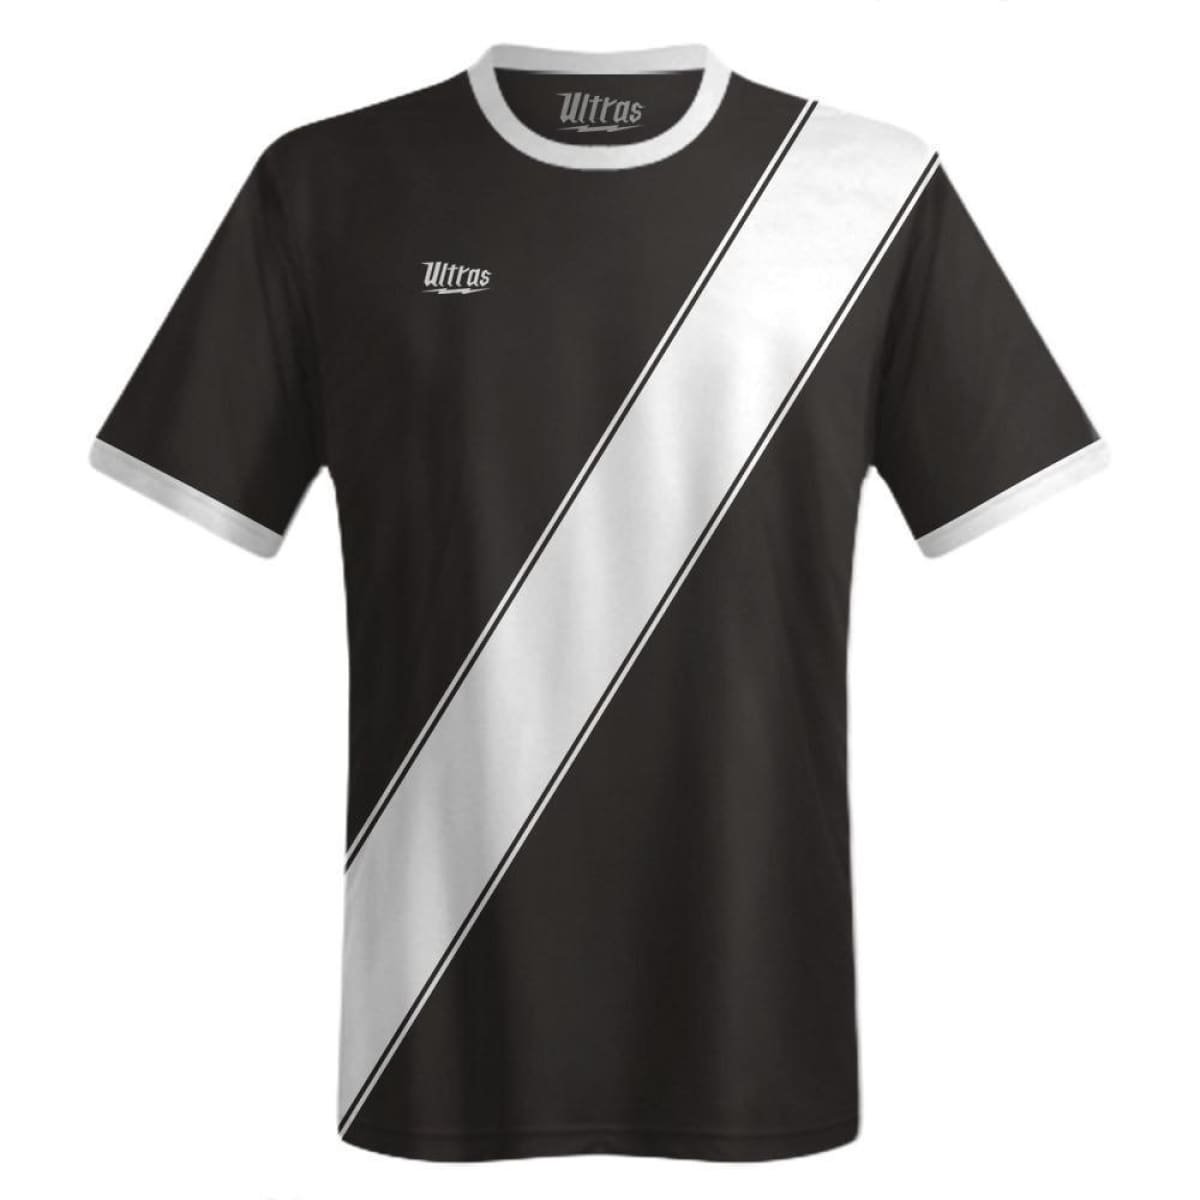 black and white soccer jersey team